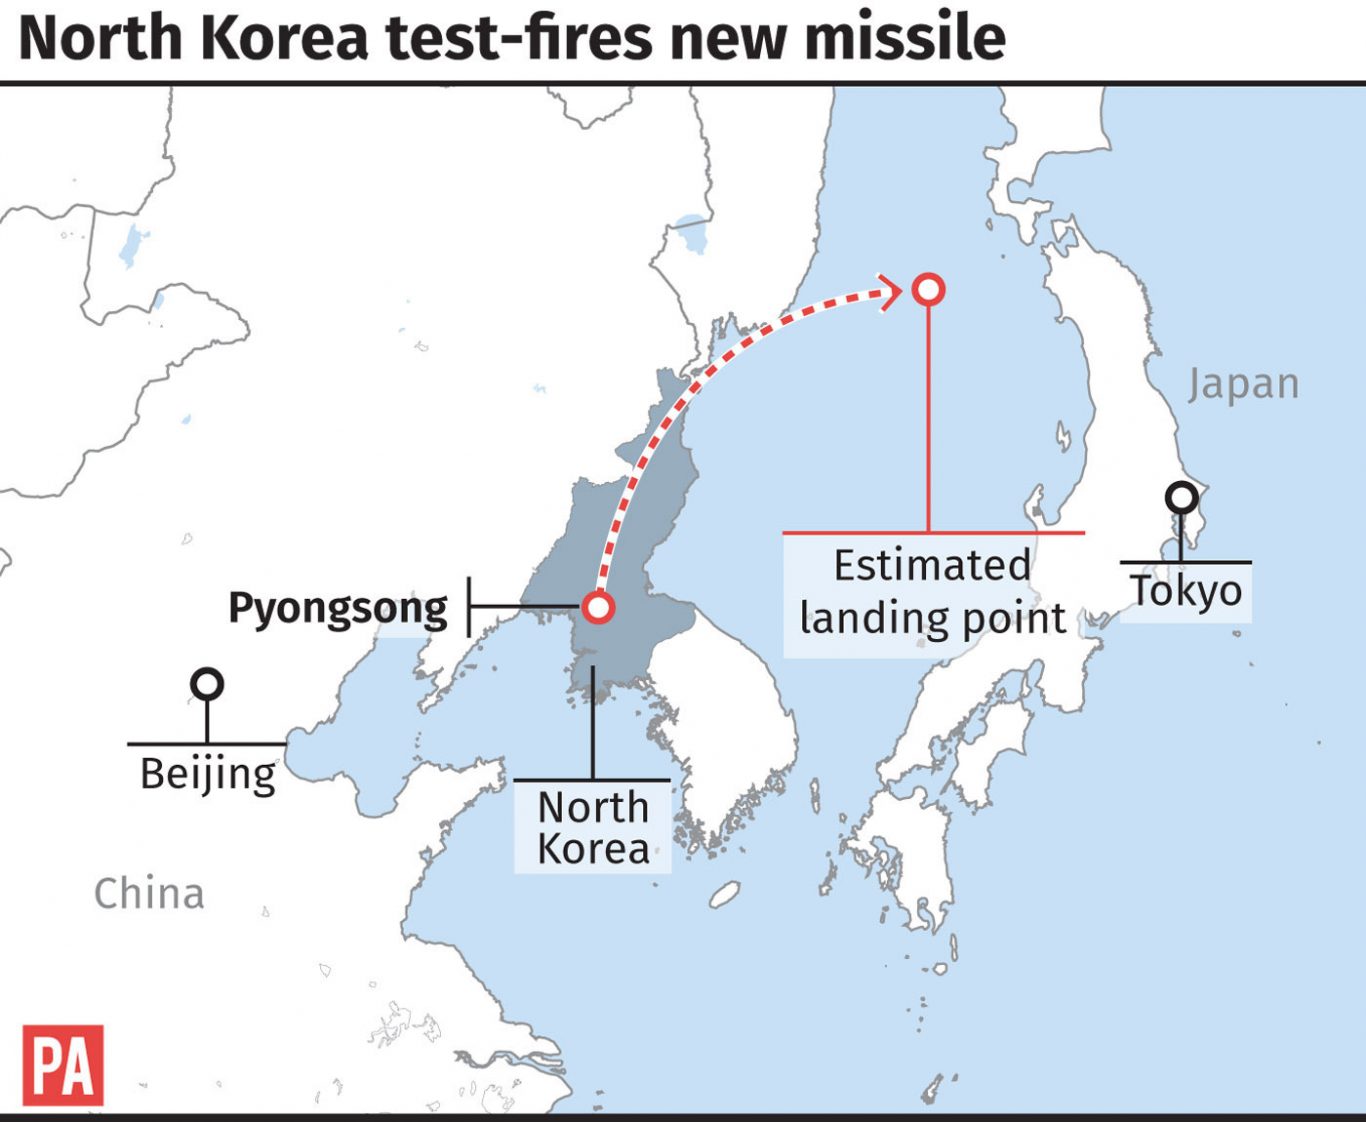 Approximate flight path and landing area of North Korea's latest missile test firing